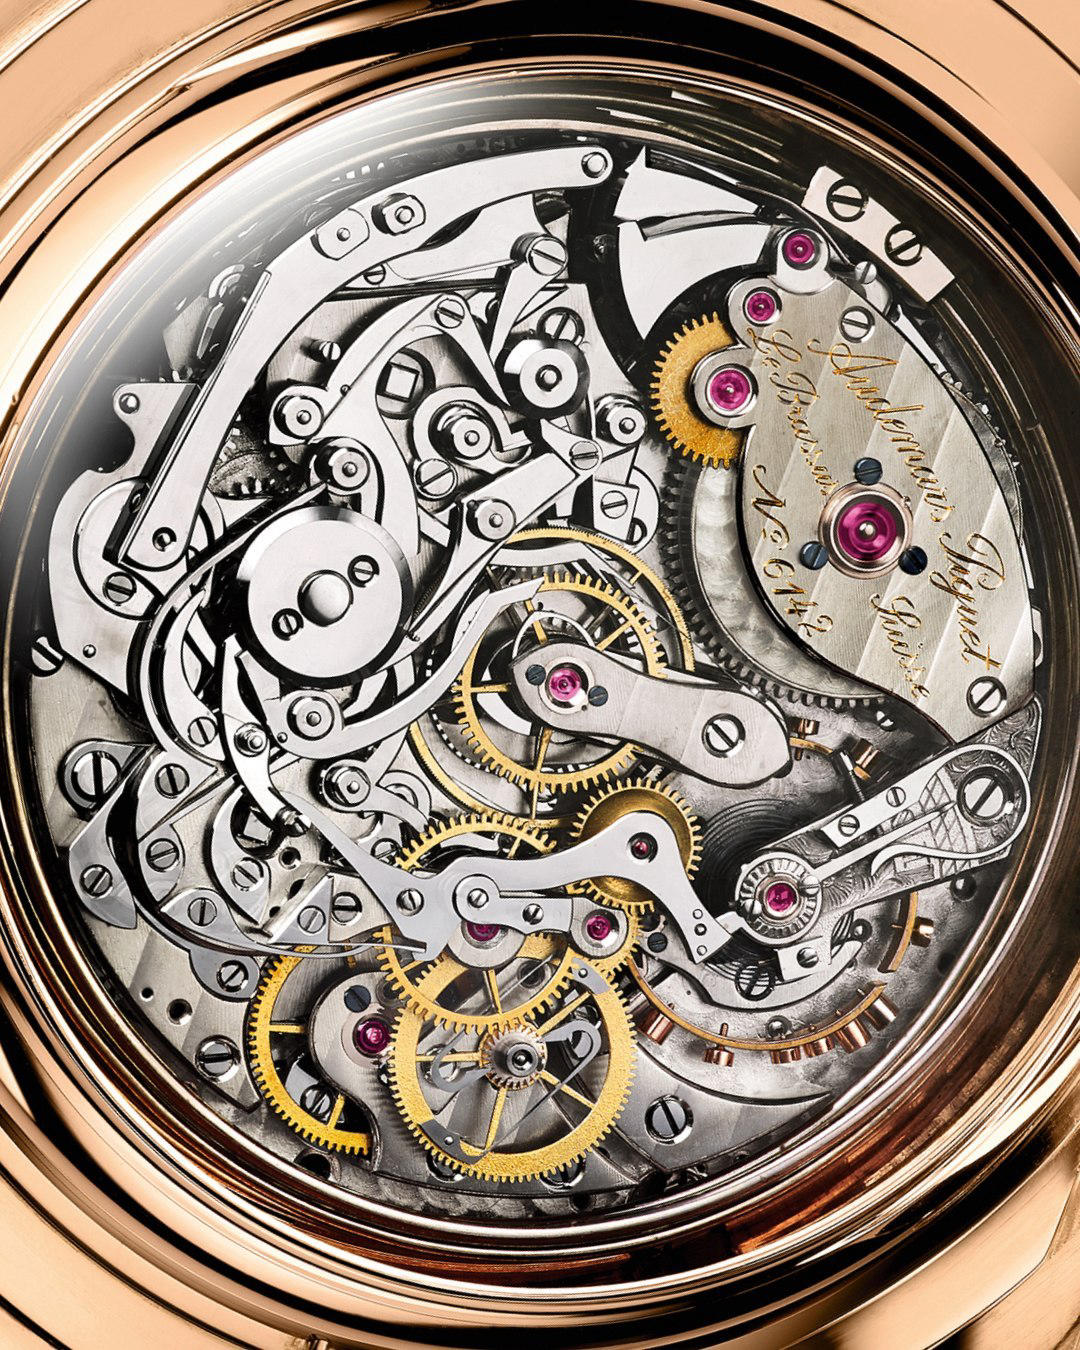 image  1 A fine feat of watchmaking savoir-faire